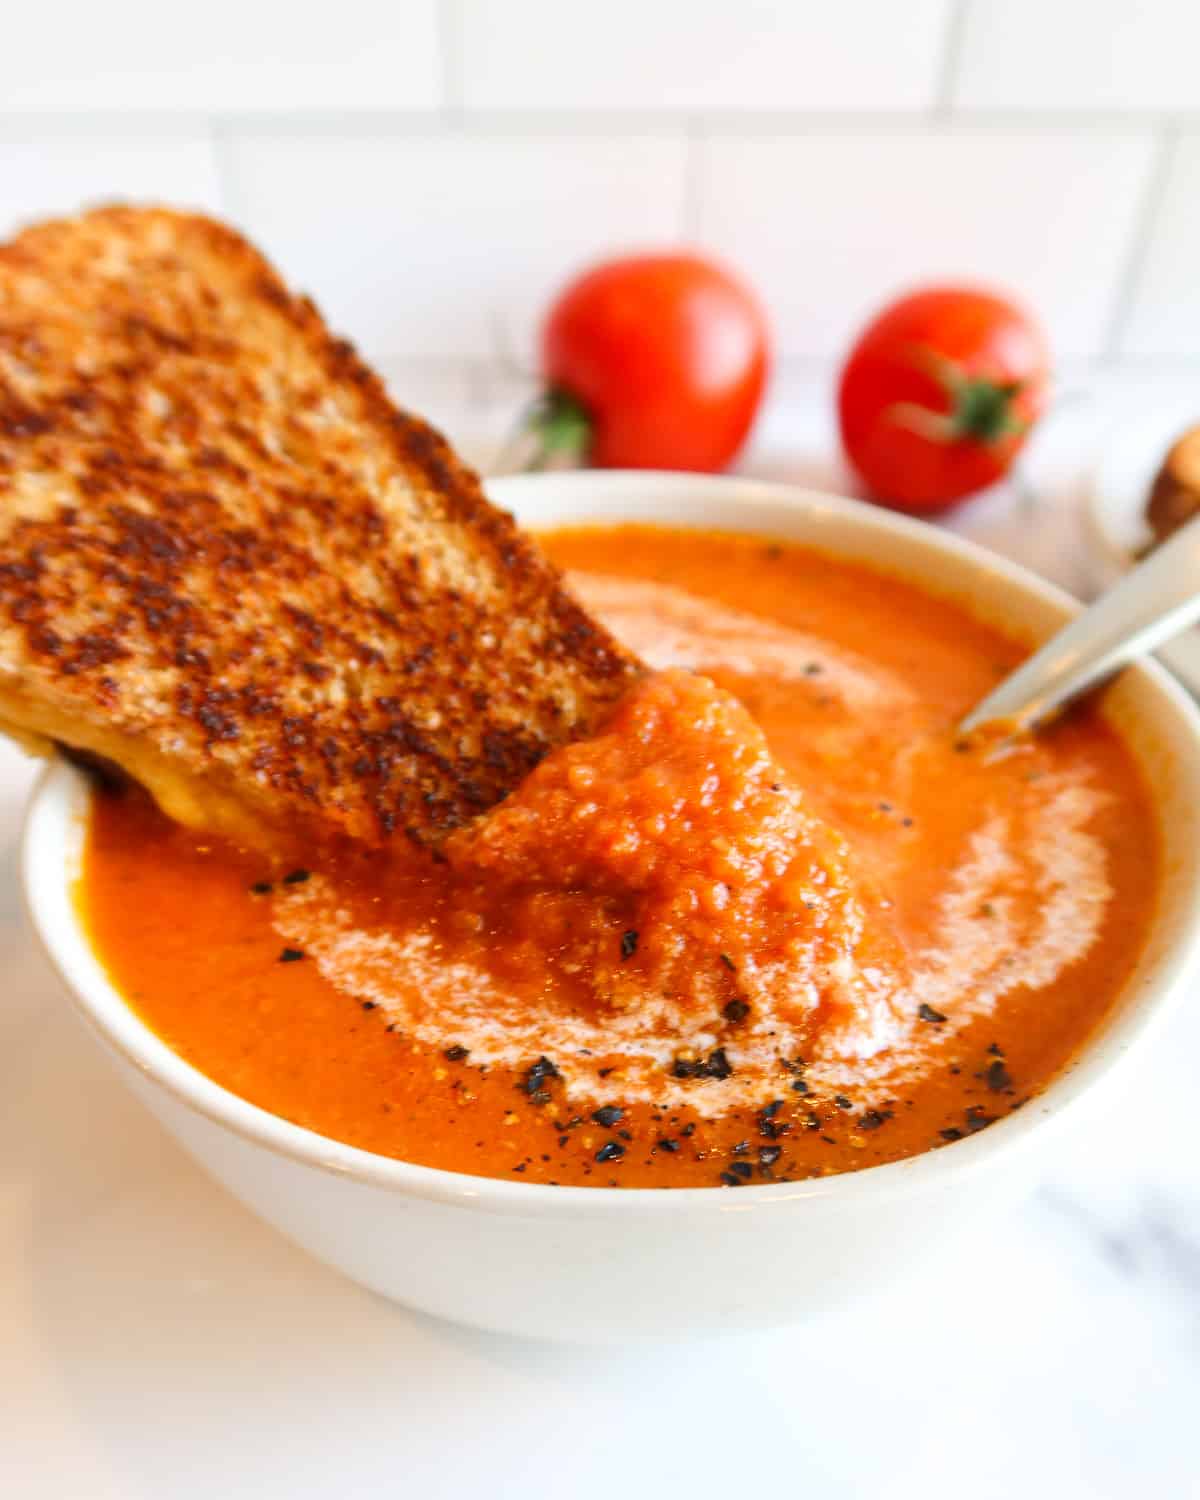 Dipping grilled cheese sandwich in tomato soup.